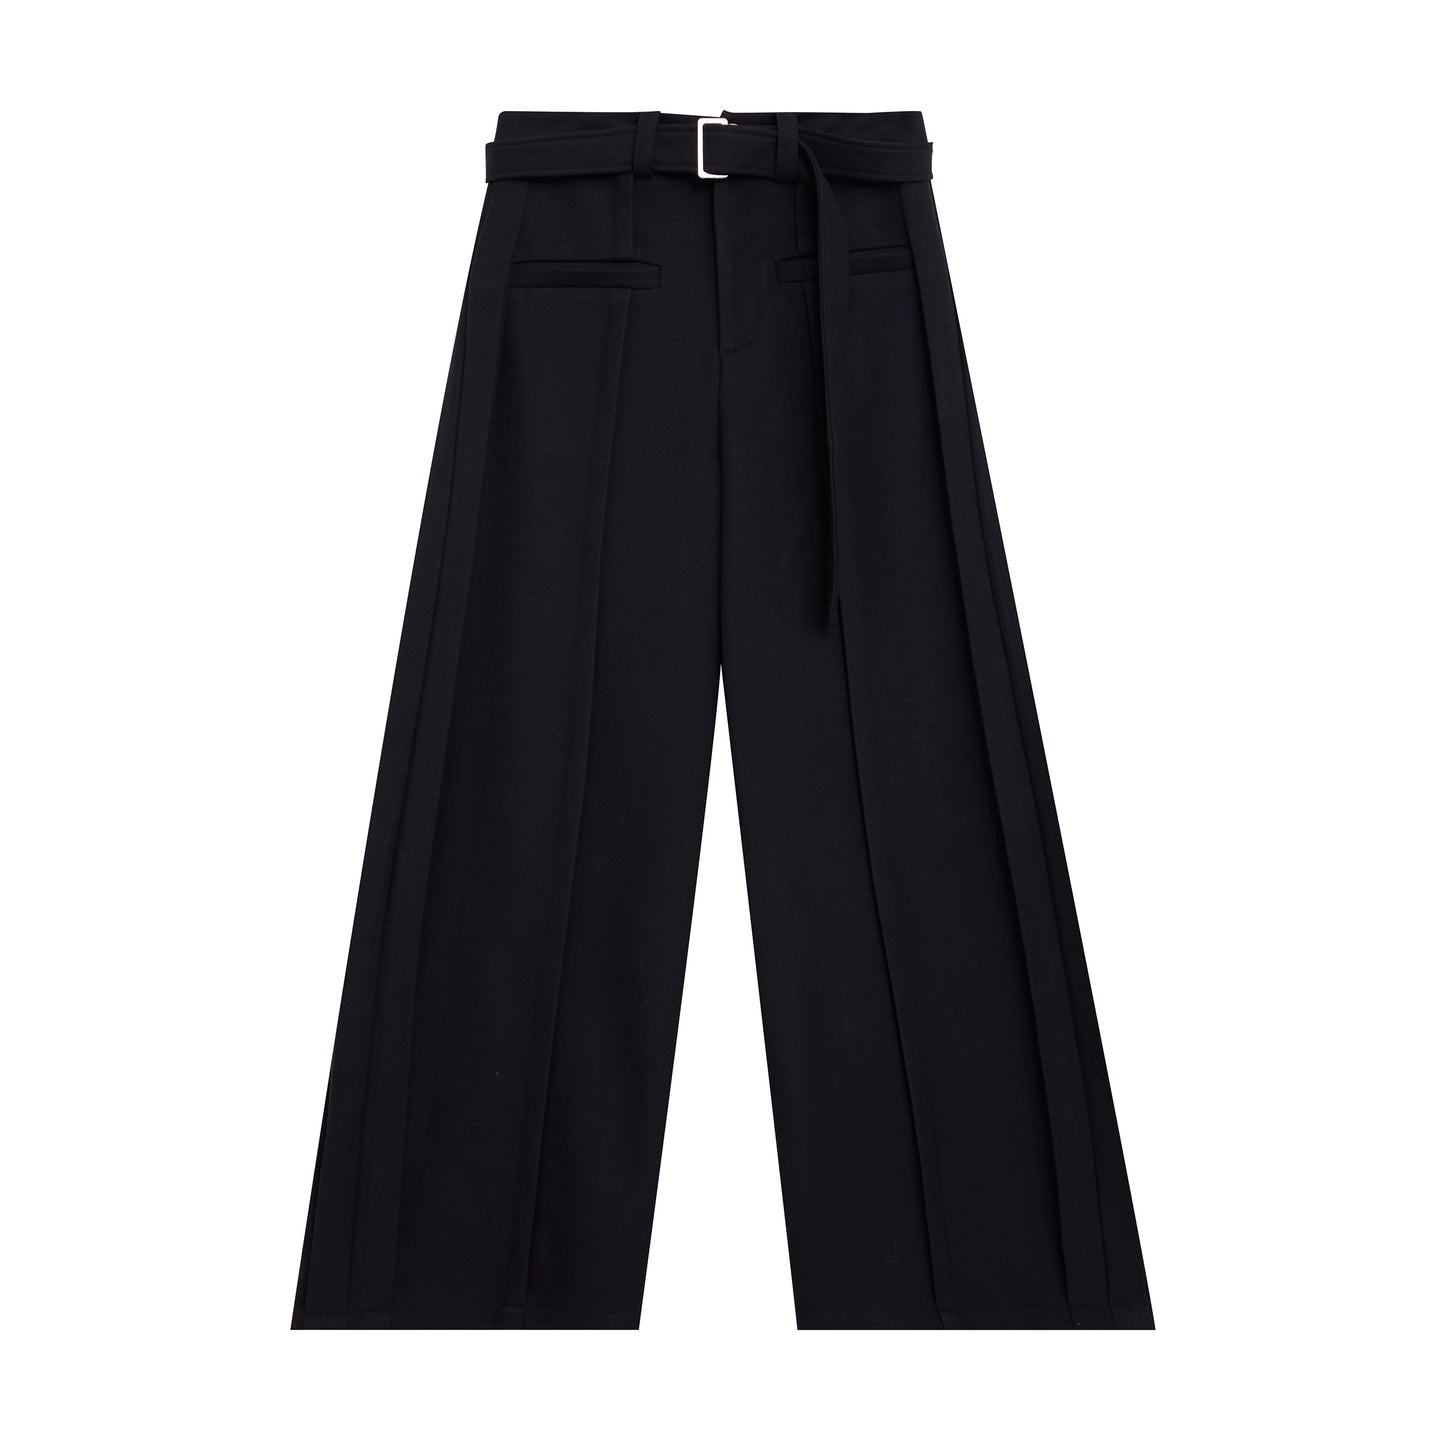 CulturE niche deconstructed sculptural line slacks with a waistband design wide leg pants for spring loose and slouchy trousers